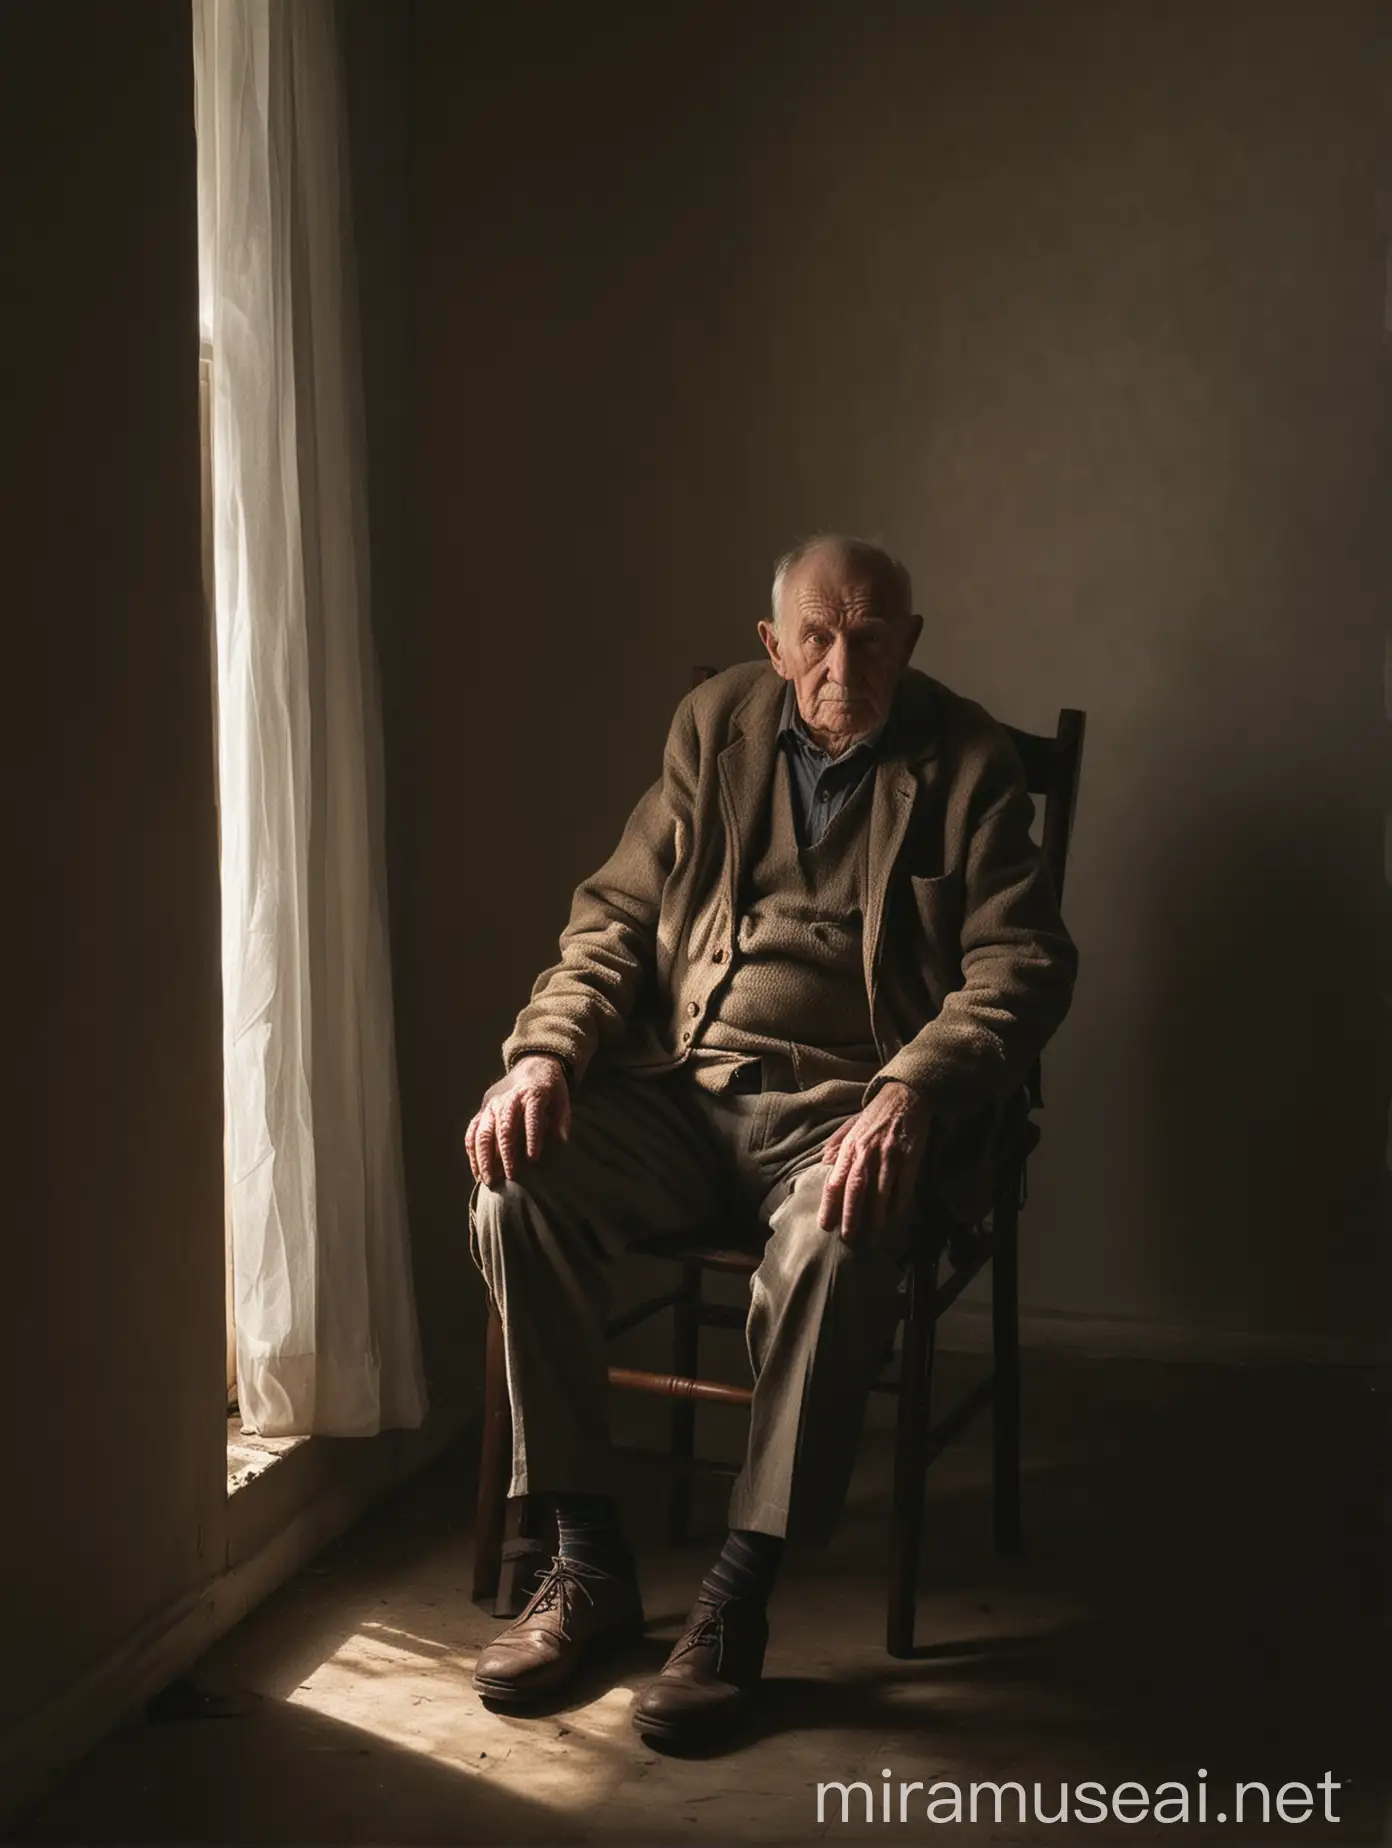 Old man next to a window sitting on a chair lit by single light source